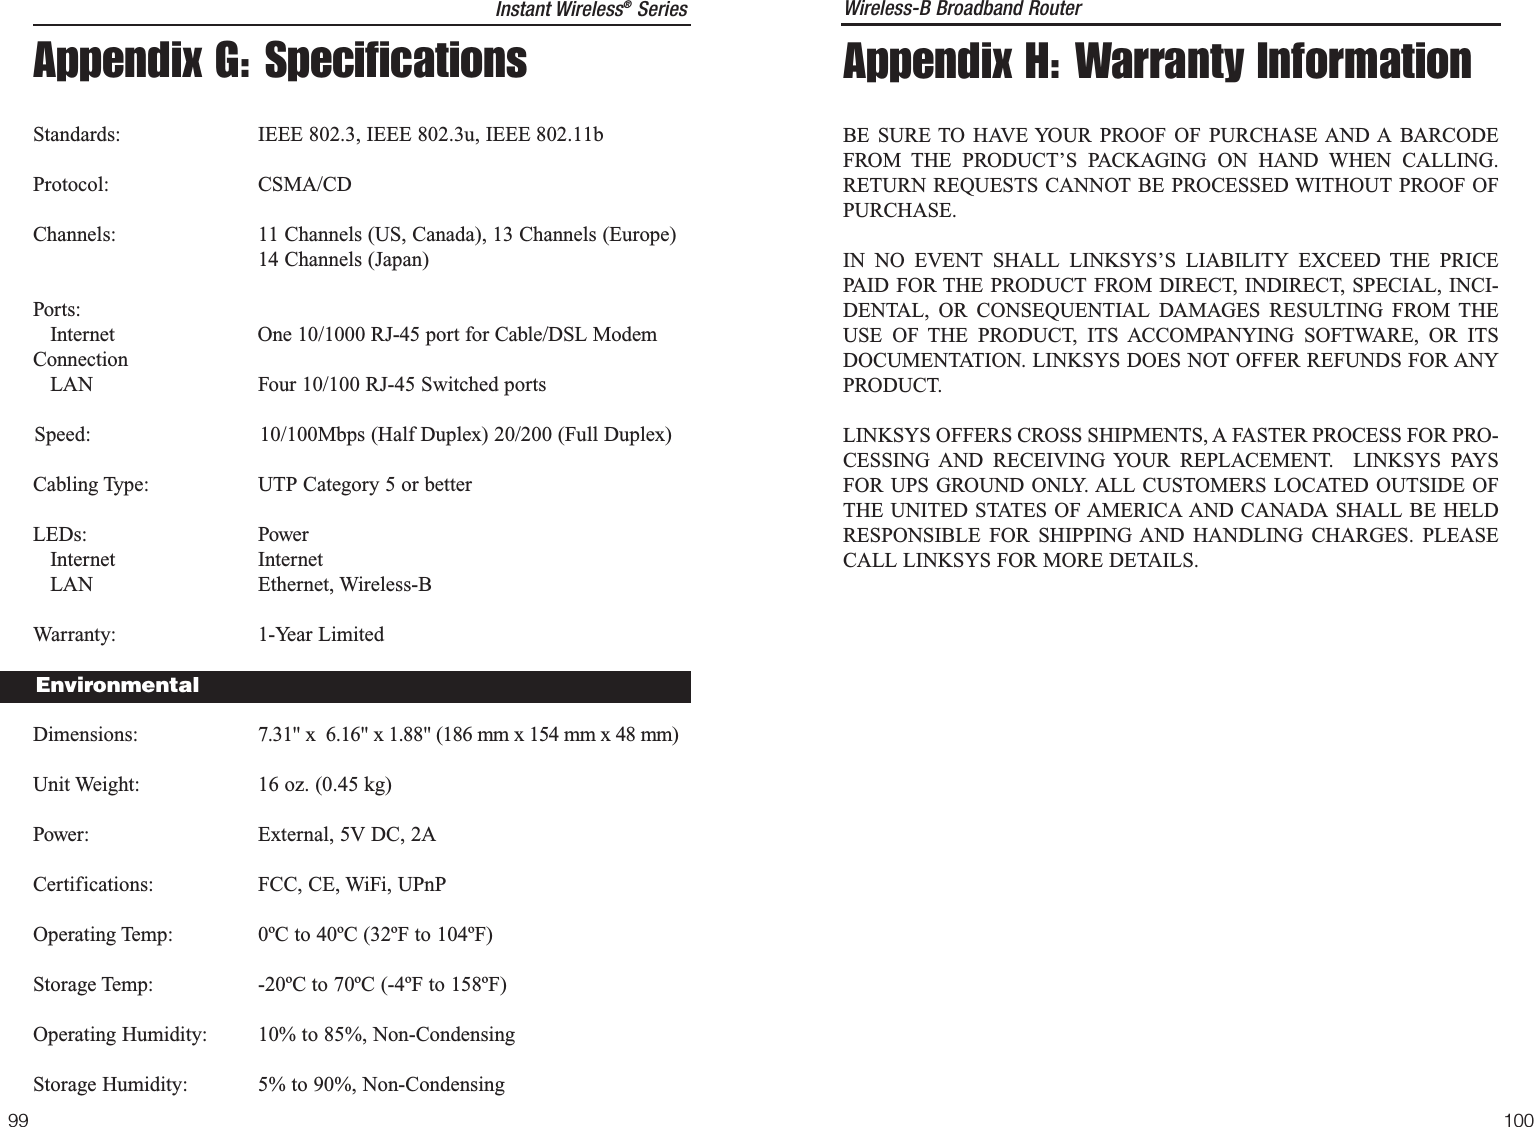 Appendix H: Warranty InformationBE SURE TO HAVE YOUR PROOF OF PURCHASE AND A BARCODEFROM THE PRODUCT’S PACKAGING ON HAND WHEN CALLING.RETURN REQUESTS CANNOT BE PROCESSED WITHOUT PROOF OFPURCHASE. IN NO EVENT SHALL LINKSYS’S LIABILITY EXCEED THE PRICEPAID FOR THE PRODUCT FROM DIRECT, INDIRECT, SPECIAL, INCI-DENTAL, OR CONSEQUENTIAL DAMAGES RESULTING FROM THEUSE OF THE PRODUCT, ITS ACCOMPANYING SOFTWARE, OR ITSDOCUMENTATION. LINKSYS DOES NOT OFFER REFUNDS FOR ANYPRODUCT. LINKSYS OFFERS CROSS SHIPMENTS, A FASTER PROCESS FOR PRO-CESSING AND RECEIVING YOUR REPLACEMENT.  LINKSYS PAYSFOR UPS GROUND ONLY. ALL CUSTOMERS LOCATED OUTSIDE OFTHE UNITED STATES OF AMERICA AND CANADA SHALL BE HELDRESPONSIBLE FOR SHIPPING AND HANDLING CHARGES. PLEASECALL LINKSYS FOR MORE DETAILS.Wireless-B Broadband Router10099Appendix G: SpecificationsStandards: IEEE 802.3, IEEE 802.3u, IEEE 802.11bProtocol: CSMA/CDChannels: 11 Channels (US, Canada), 13 Channels (Europe)14 Channels (Japan)Ports:Internet One 10/1000 RJ-45 port for Cable/DSL ModemConnectionLAN  Four 10/100 RJ-45 Switched portsSpeed: 10/100Mbps (Half Duplex) 20/200 (Full Duplex)Cabling Type: UTP Category 5 or better LEDs: PowerInternet InternetLAN Ethernet, Wireless-BWarranty: 1-Year LimitedDimensions: 7.31&quot; x  6.16&quot; x 1.88&quot; (186 mm x 154 mm x 48 mm)Unit Weight: 16 oz. (0.45 kg)Power: External, 5V DC, 2ACertifications: FCC, CE, WiFi, UPnPOperating Temp: 0ºC to 40ºC (32ºF to 104ºF) Storage Temp: -20ºC to 70ºC (-4ºF to 158ºF)Operating Humidity: 10% to 85%, Non-CondensingStorage Humidity: 5% to 90%, Non-CondensingInstant Wireless®SeriesEnvironmental